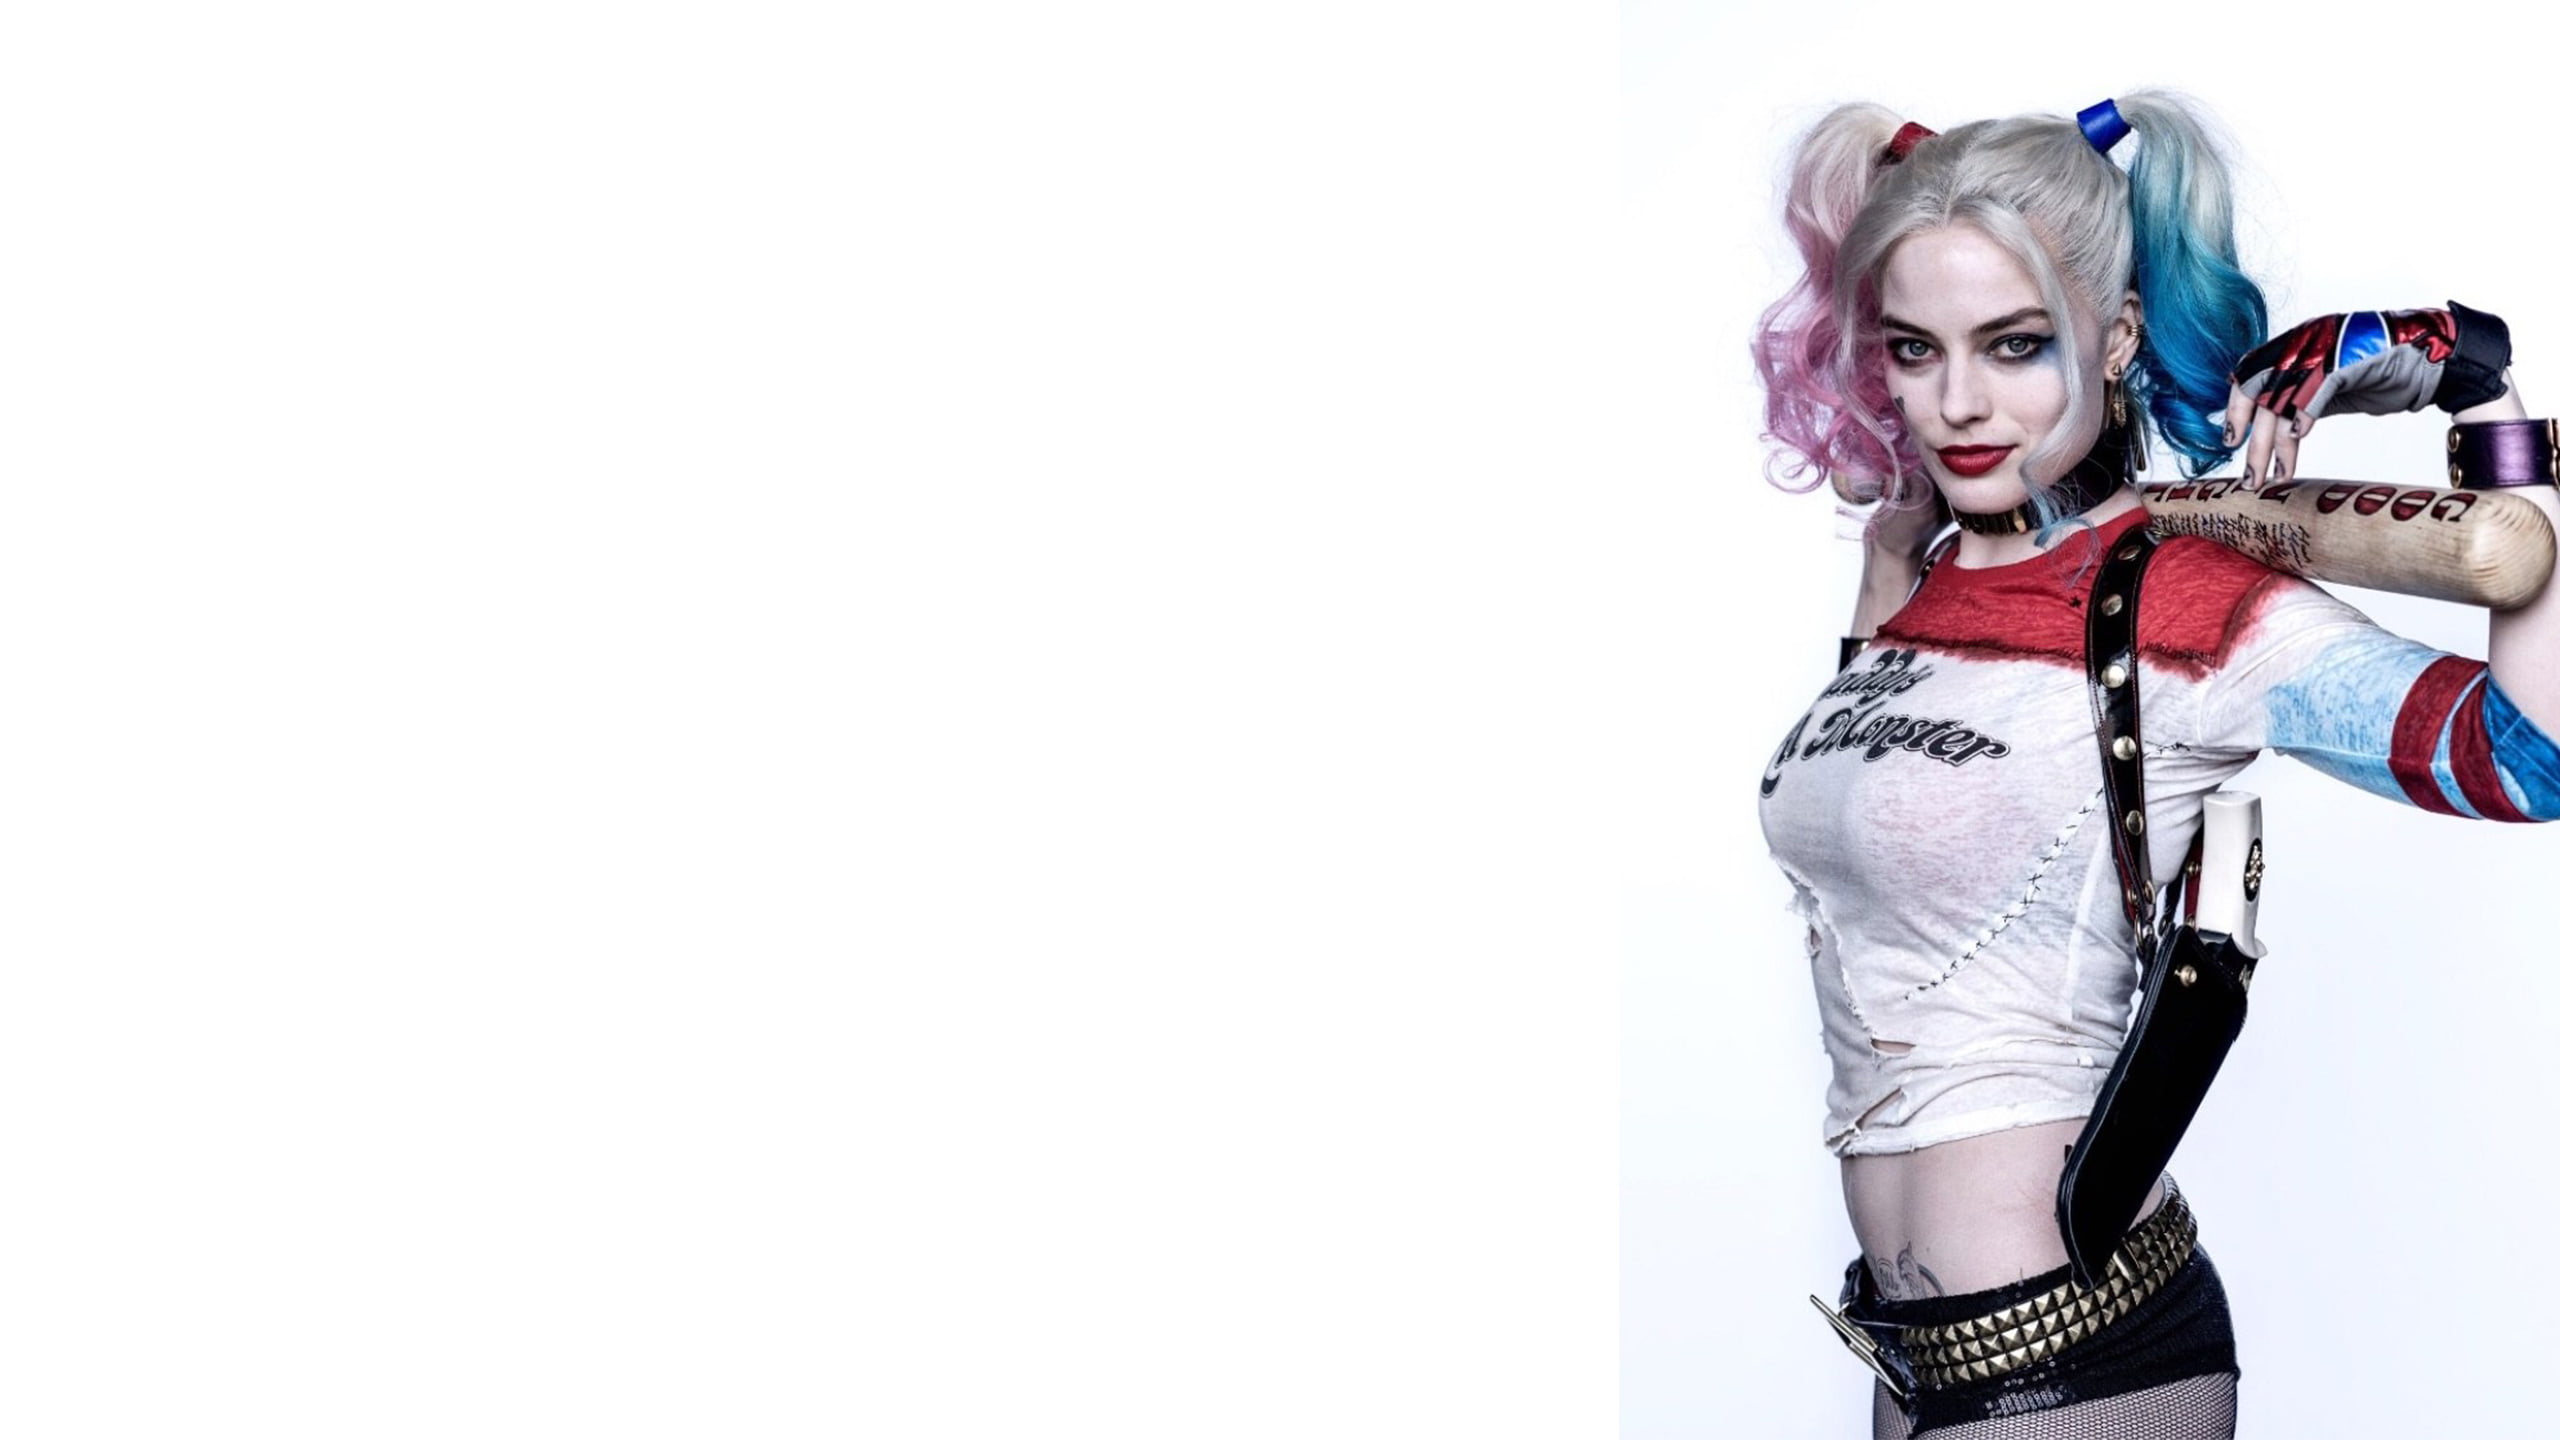 harley quinn, suicide squad, movies, 2016 movies, one person